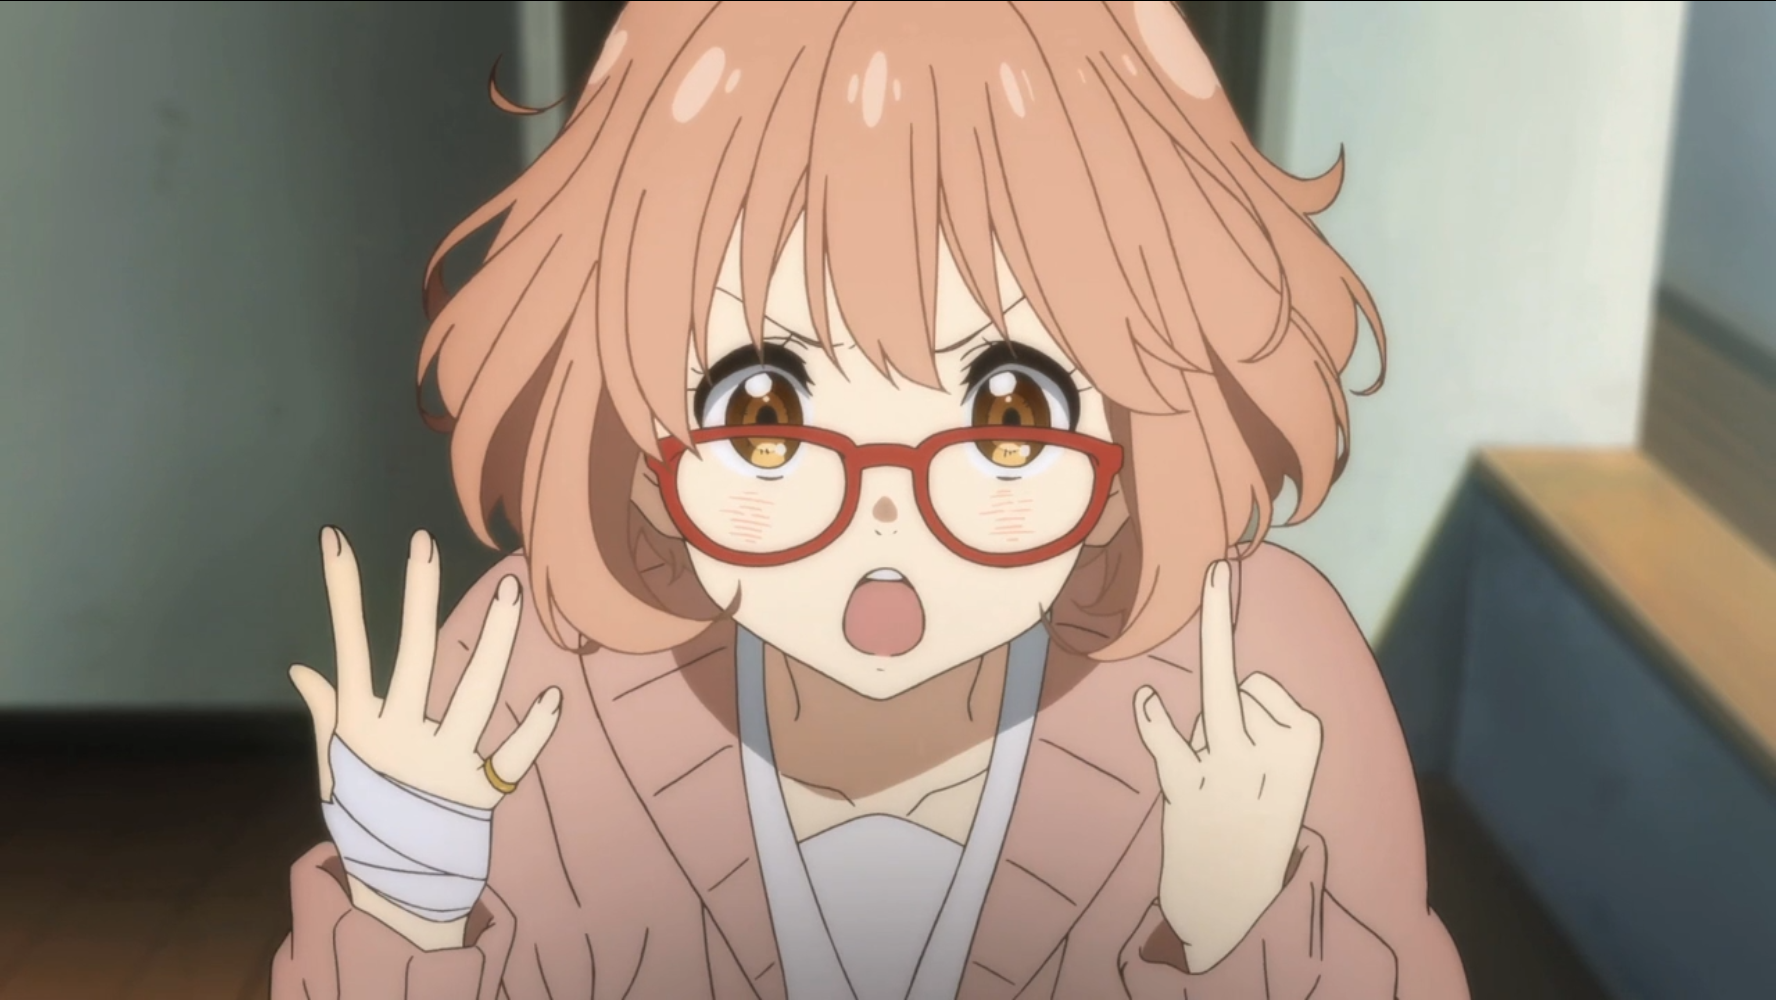 A bandaged and bespectacled Mirai Kuriyama counts off the numbers of times she's attempted to assassinate her classmate, Akihito Kanbara, on her fingers in a scene from the 2013 Beyond the Boundary TV anime.